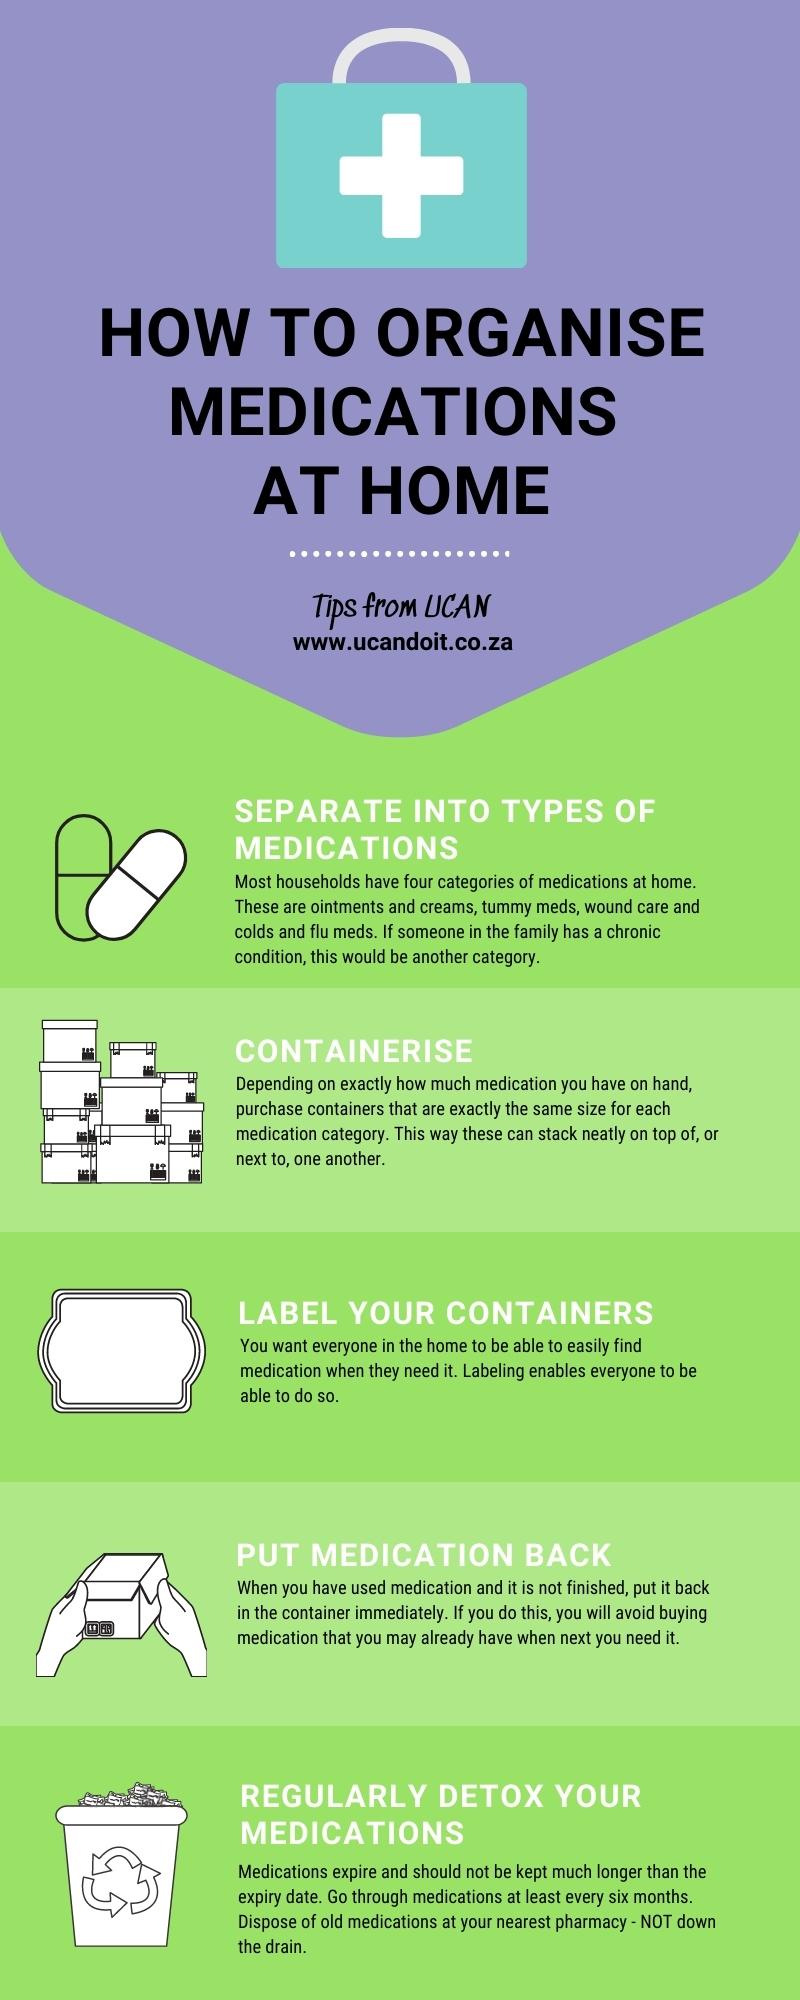 How to organise your medications at home. Storage and space saving ideas from UCAN.